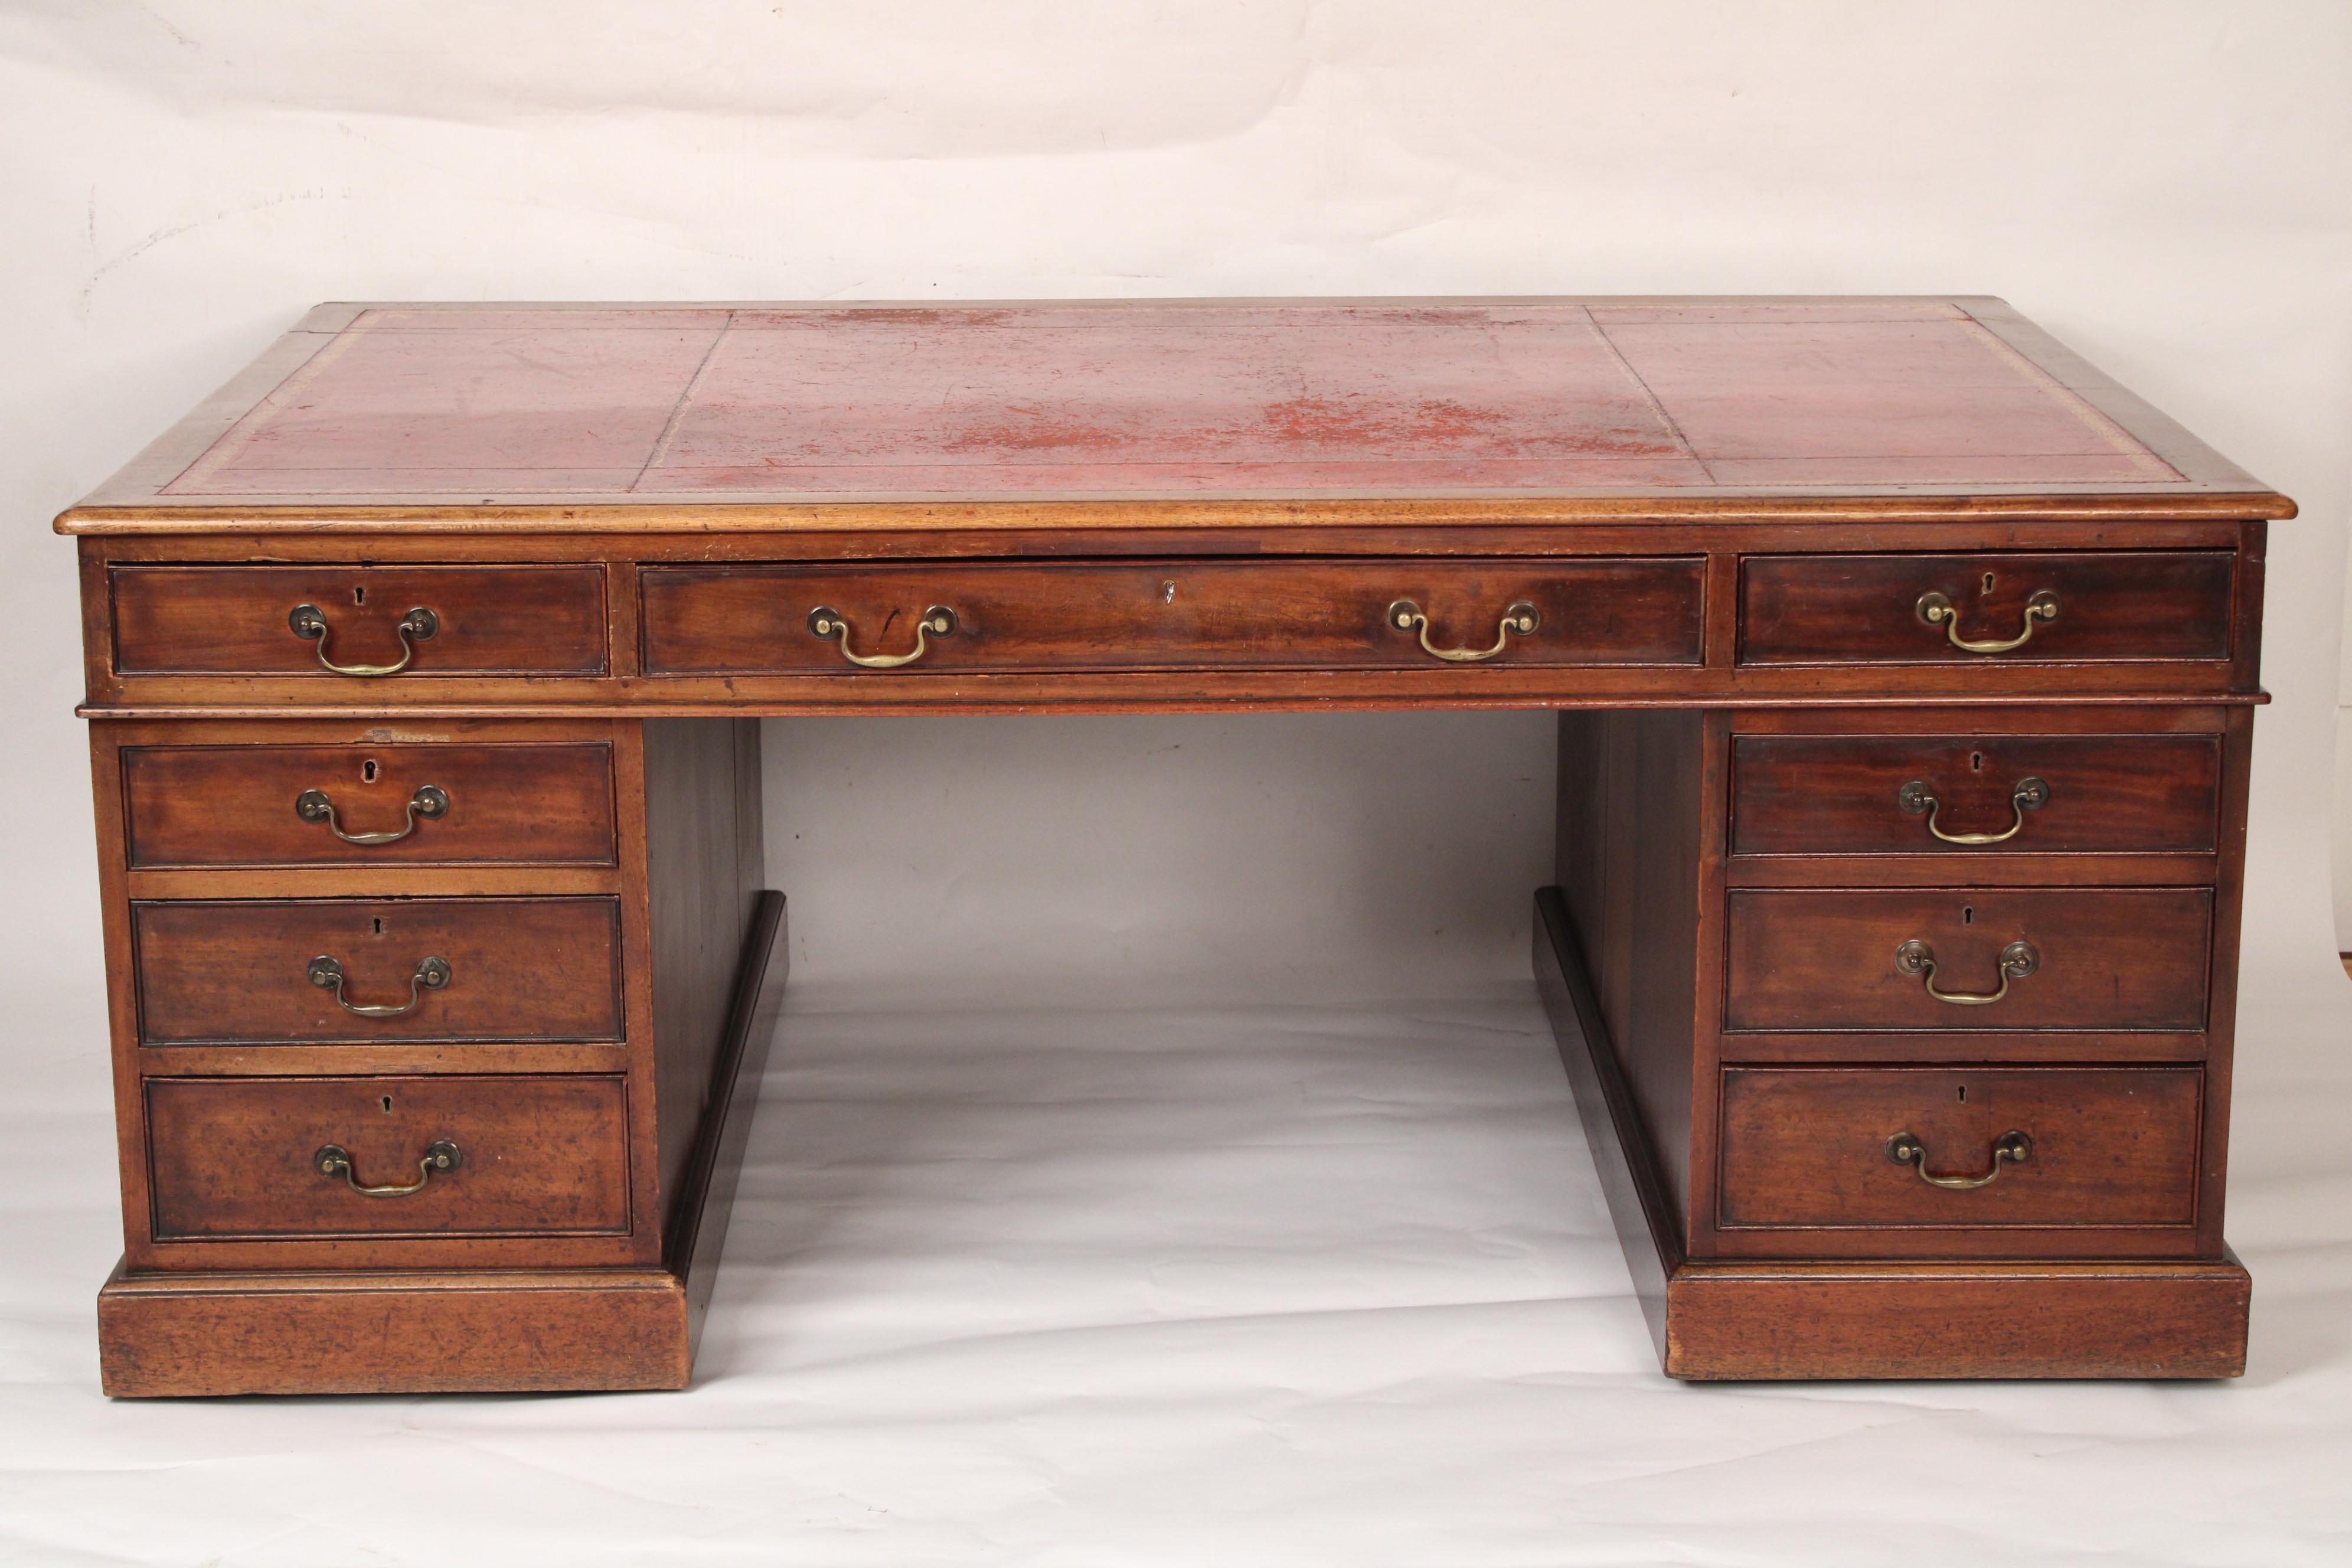 Antique George III style mahogany double pedestal partners desk with a tooled leather top, 19th century. Having a mahogany rectangular top inset with red tooled leather. The front of the desk with 3 frieze drawers over two pedestals each with three